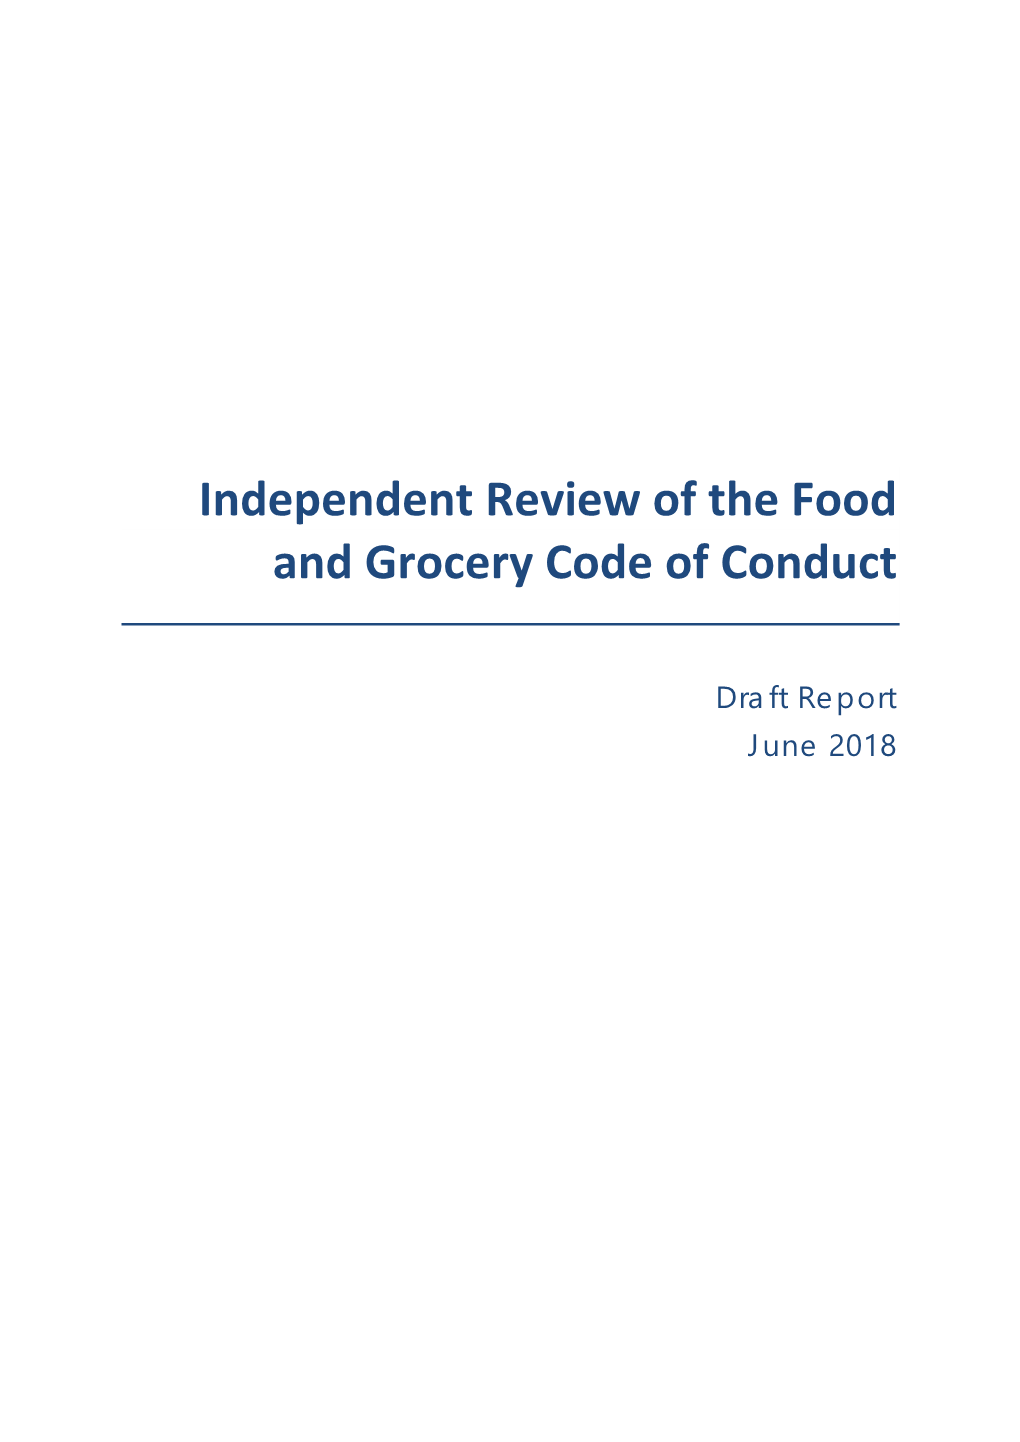 Independent Review of the Food and Grocery Code of Conduct